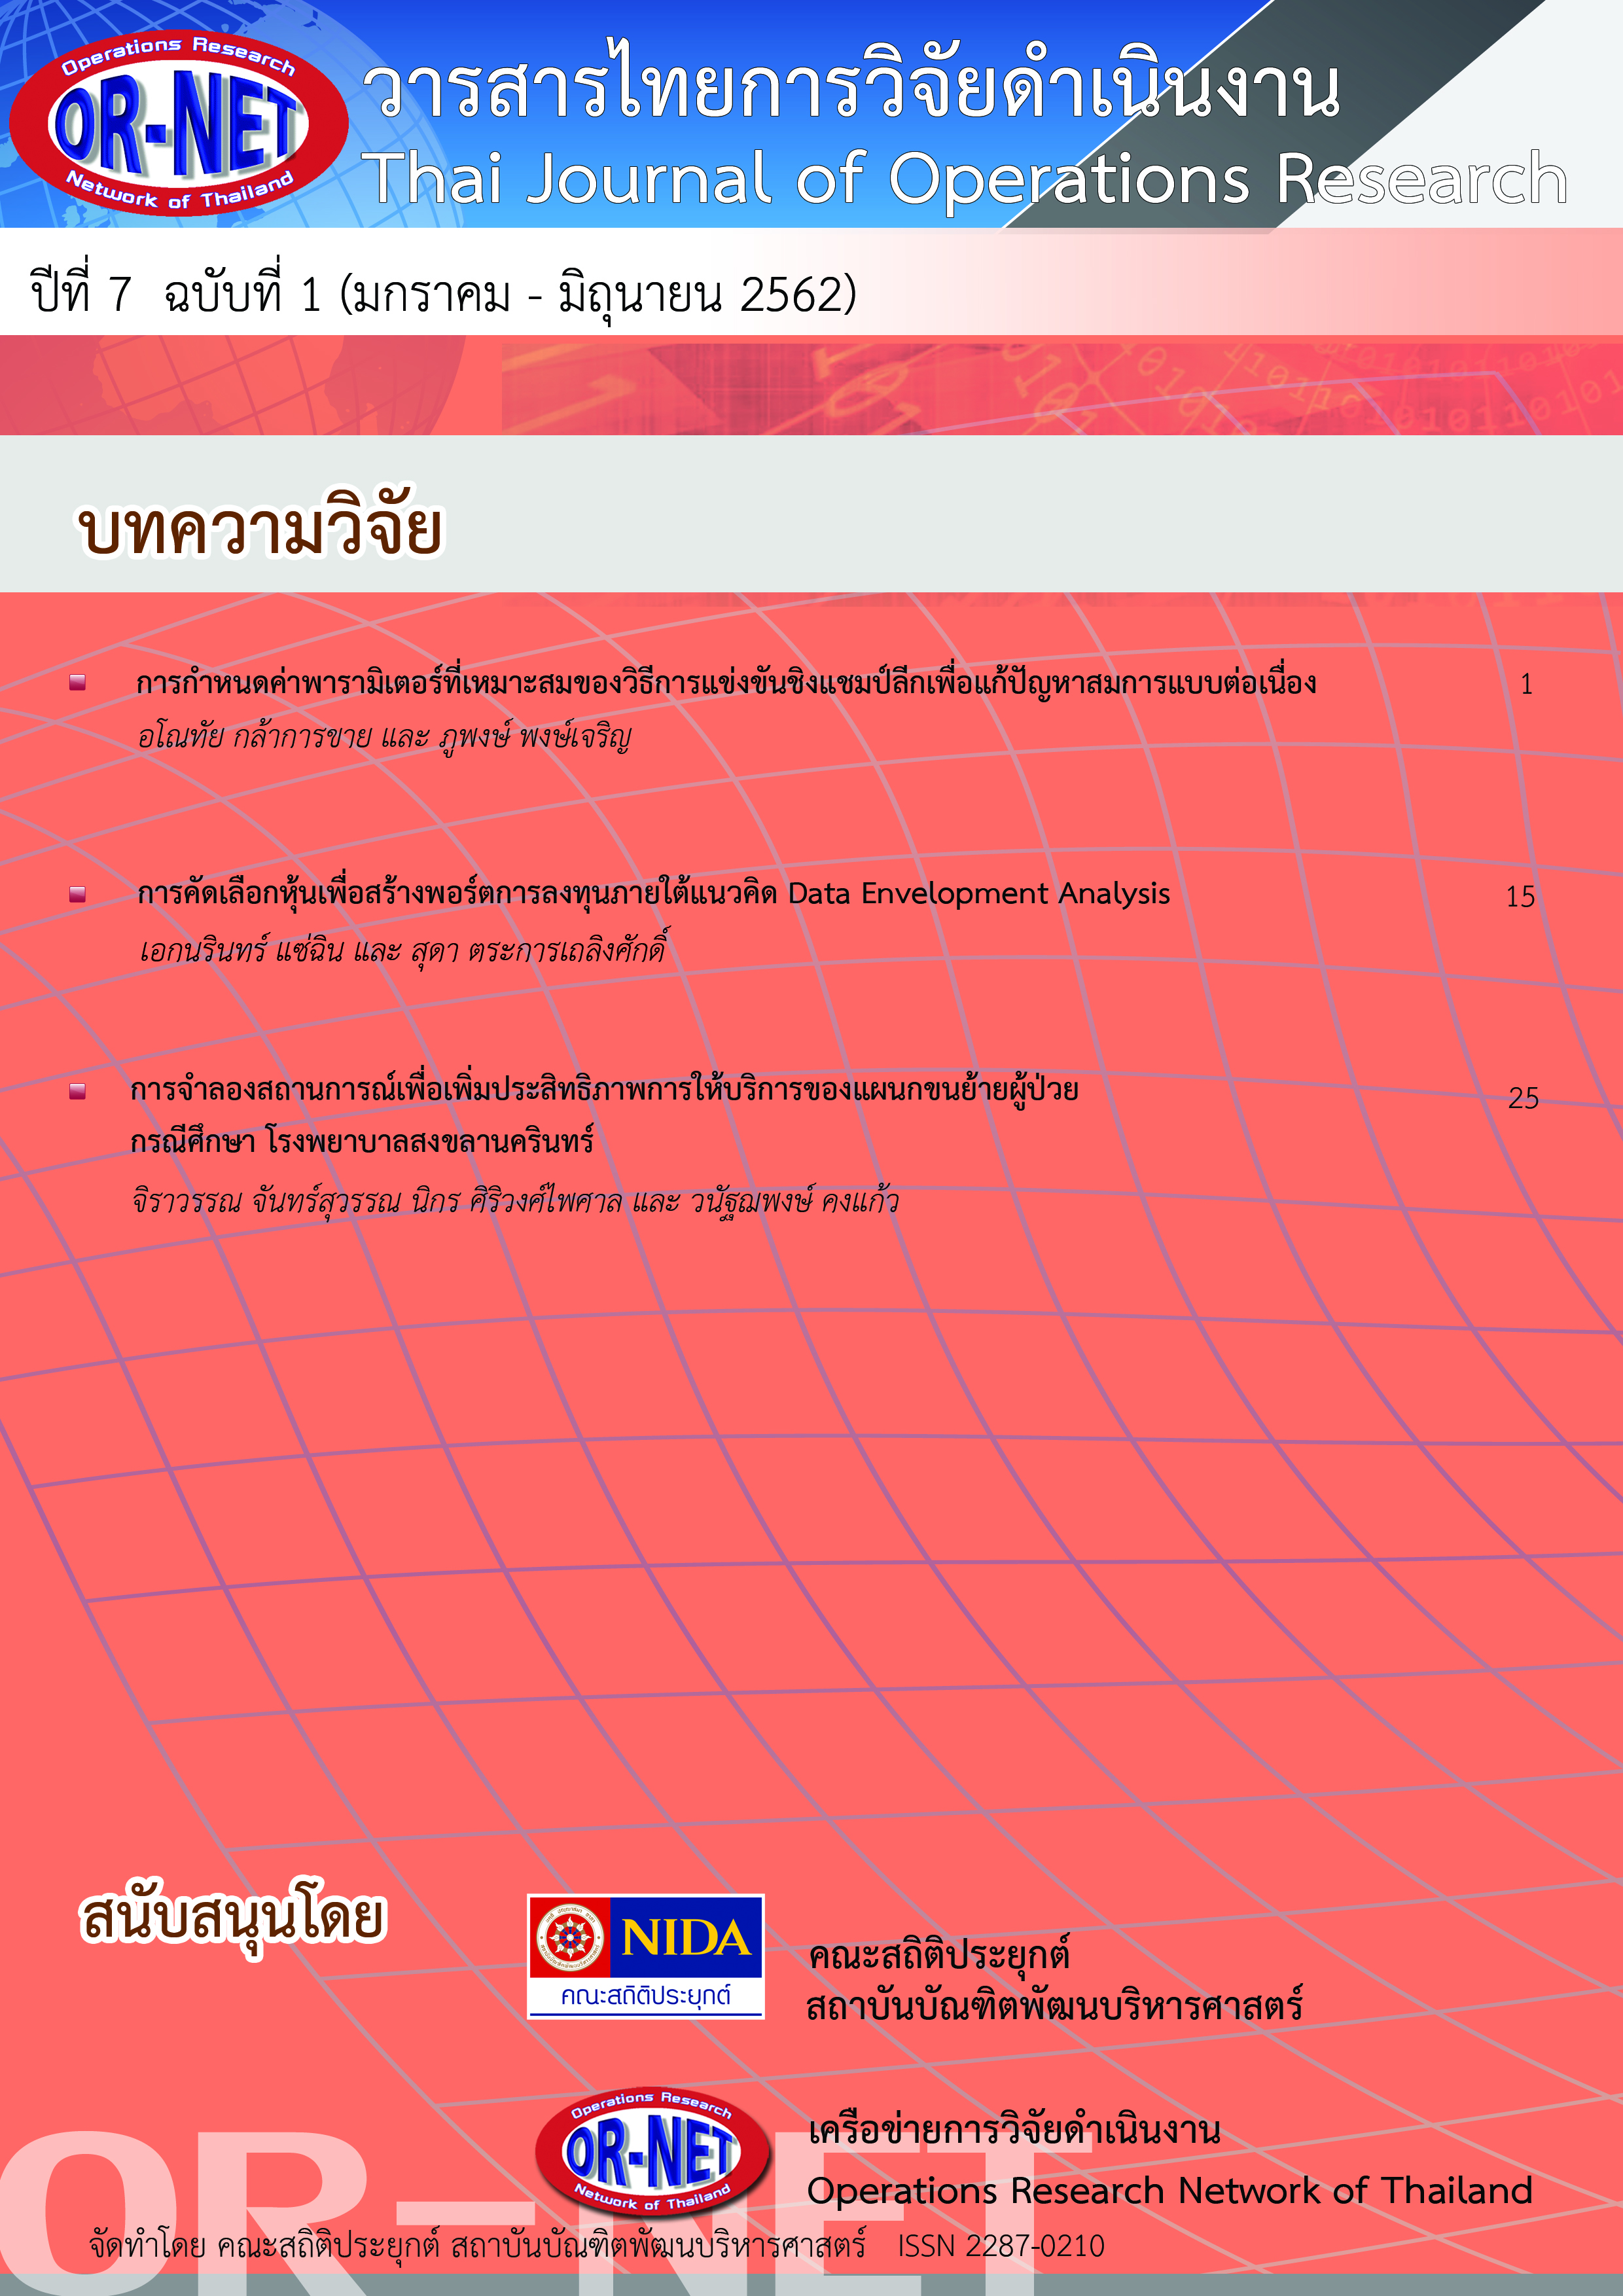 					View Vol. 7 No. 1 (2019): Thai  Journal of Operations Research: TJOR Vol 7 No 1 January - June 2019
				